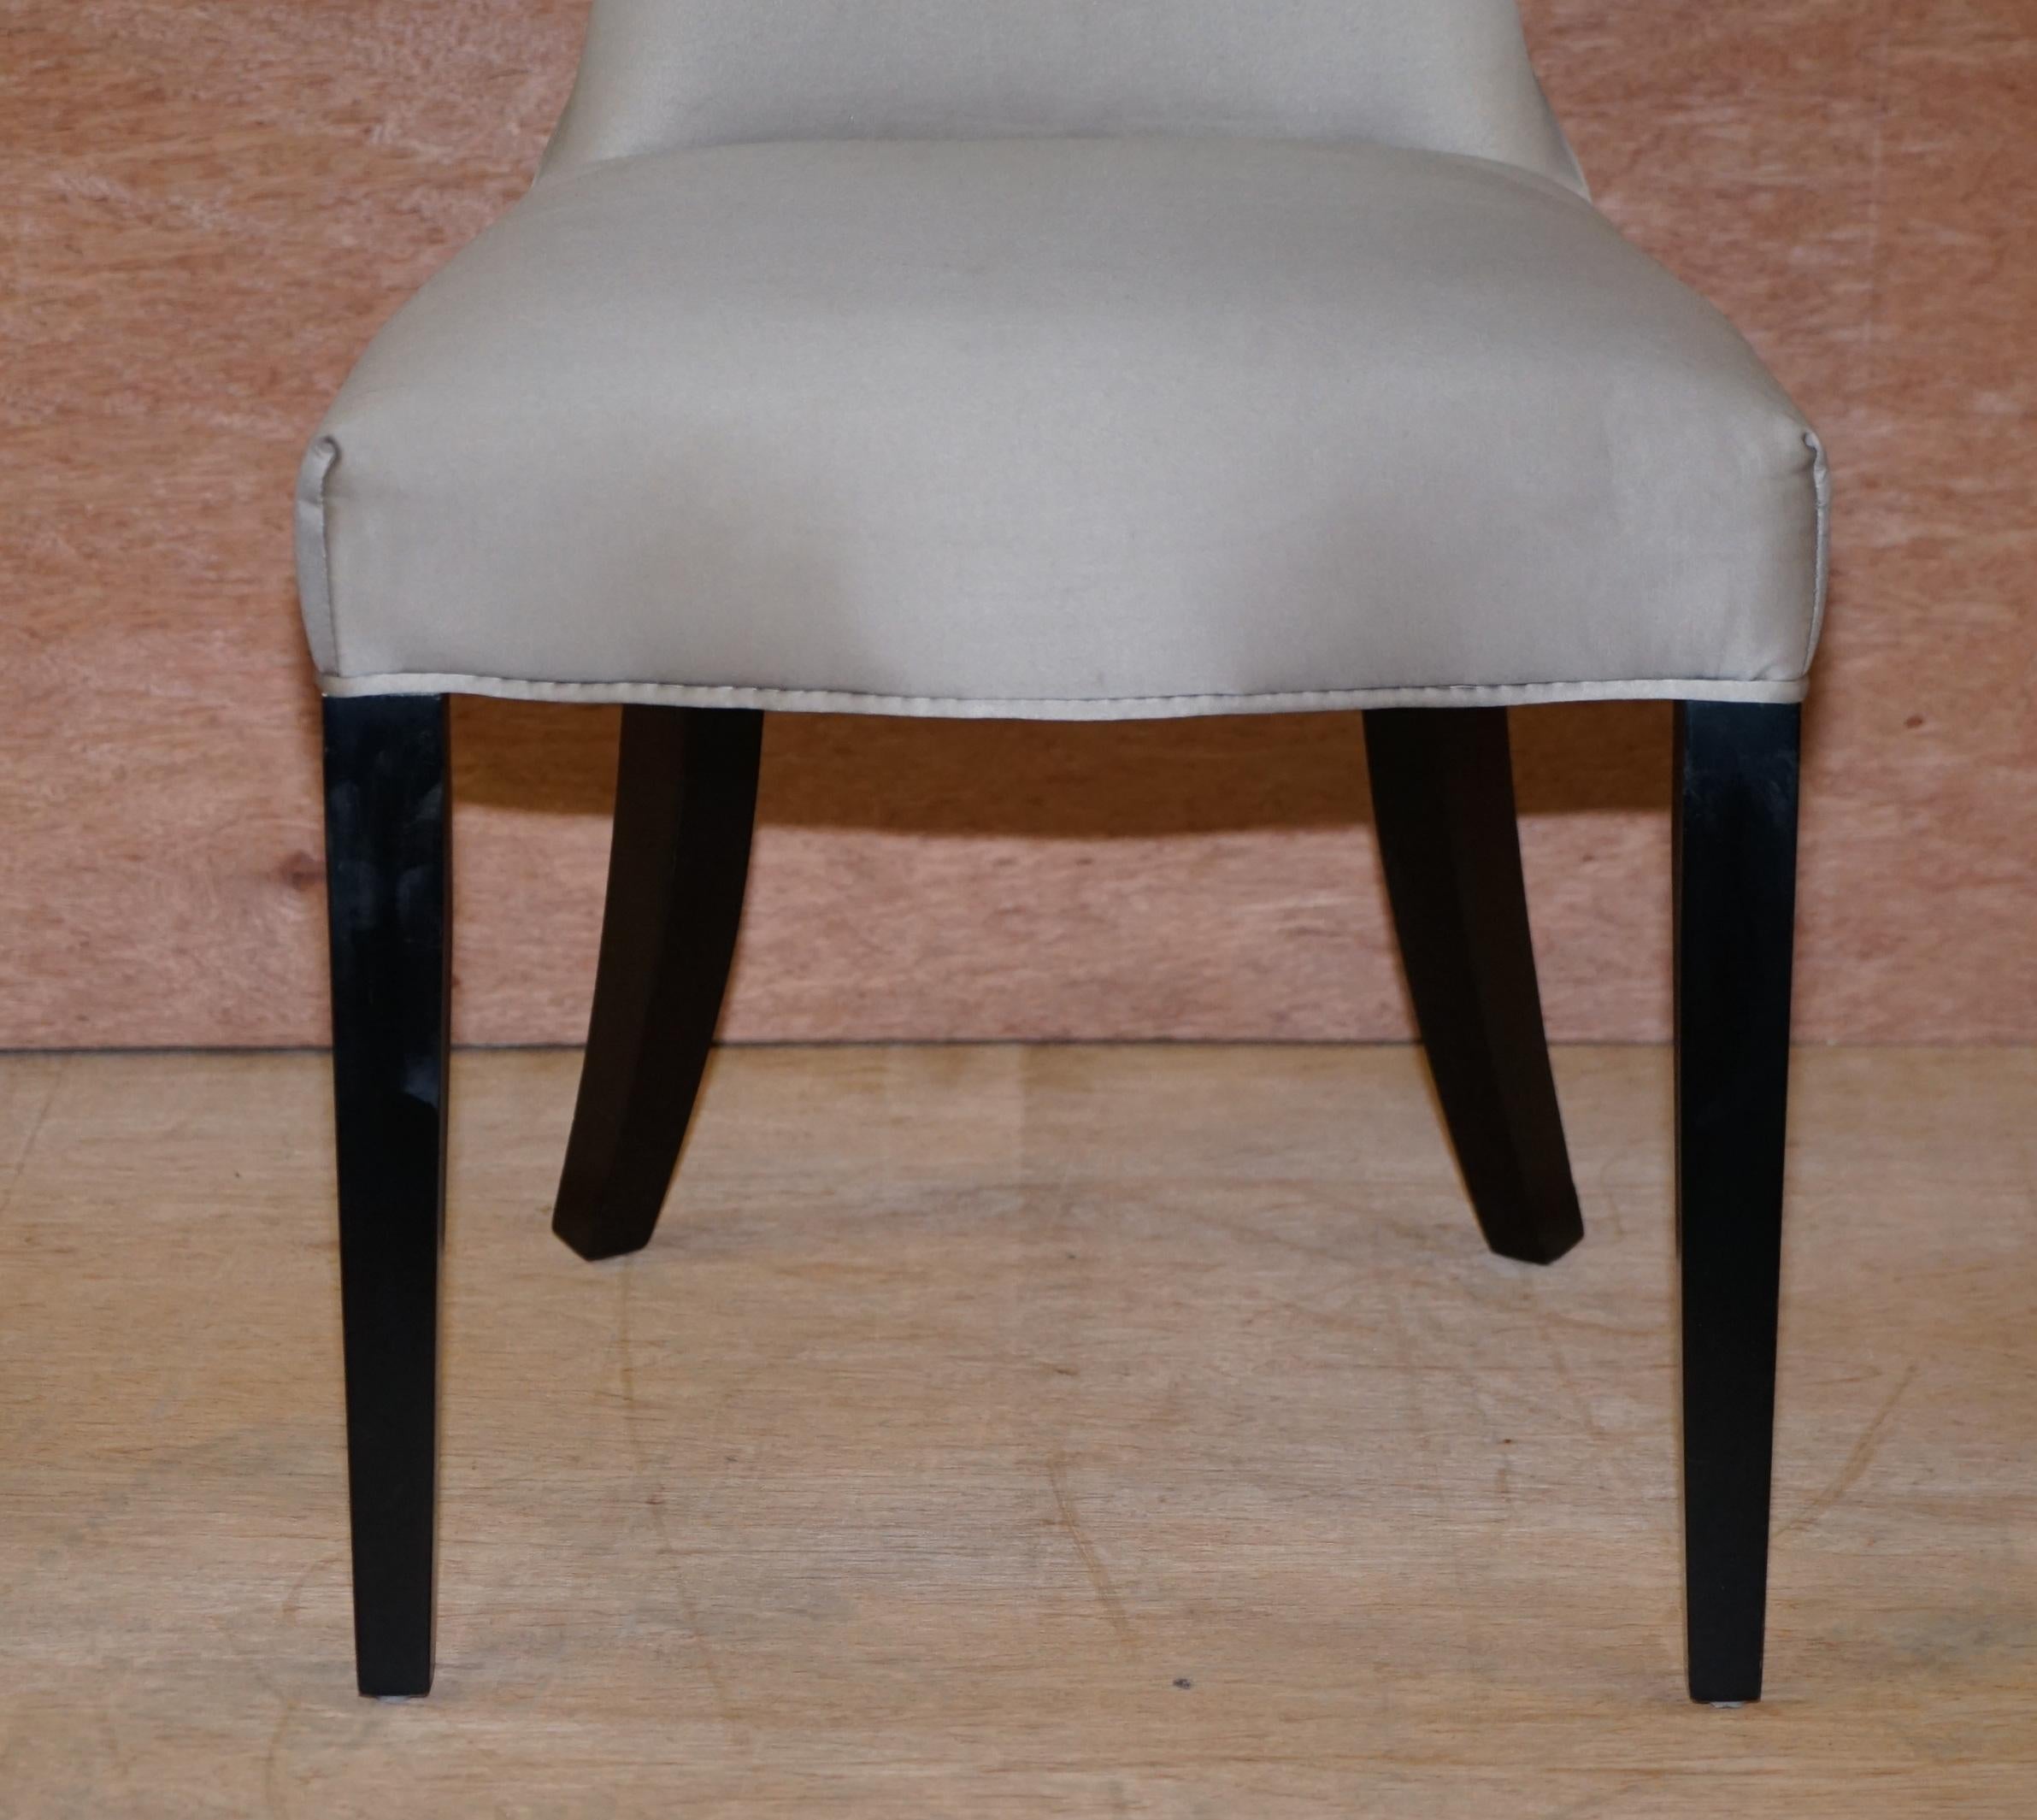 English Suite of 8 Curved Back Coach House Chairs Ltd Dining Chairs Chesterfield Button